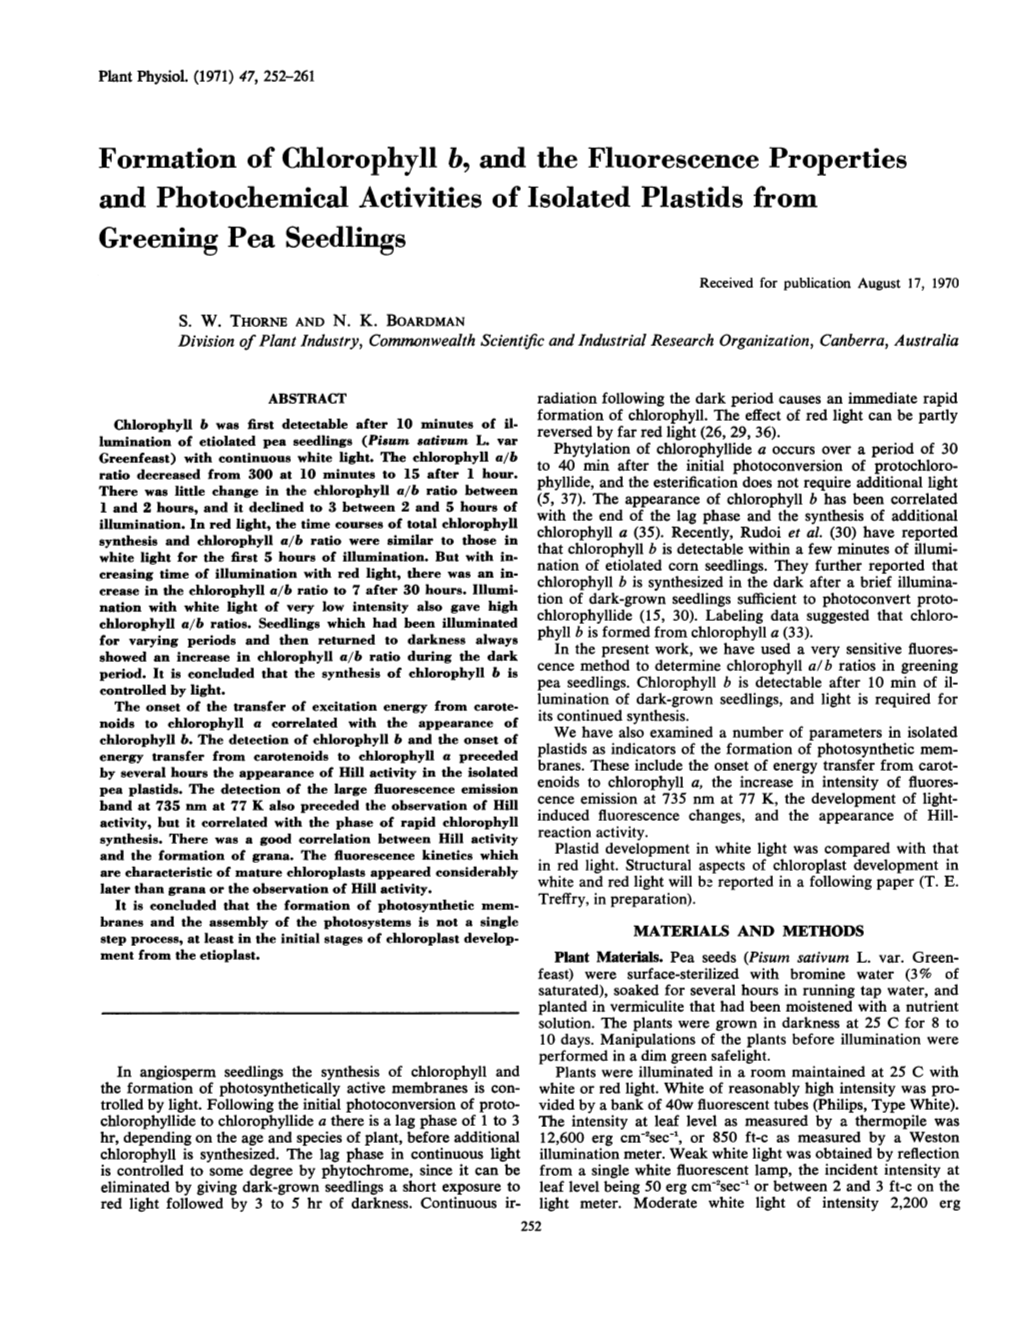 Formation of Chlorophyll B, and the Fluorescence Properties and Photochemical Activities of Isolated Plastids from Greening Pea Seedlings